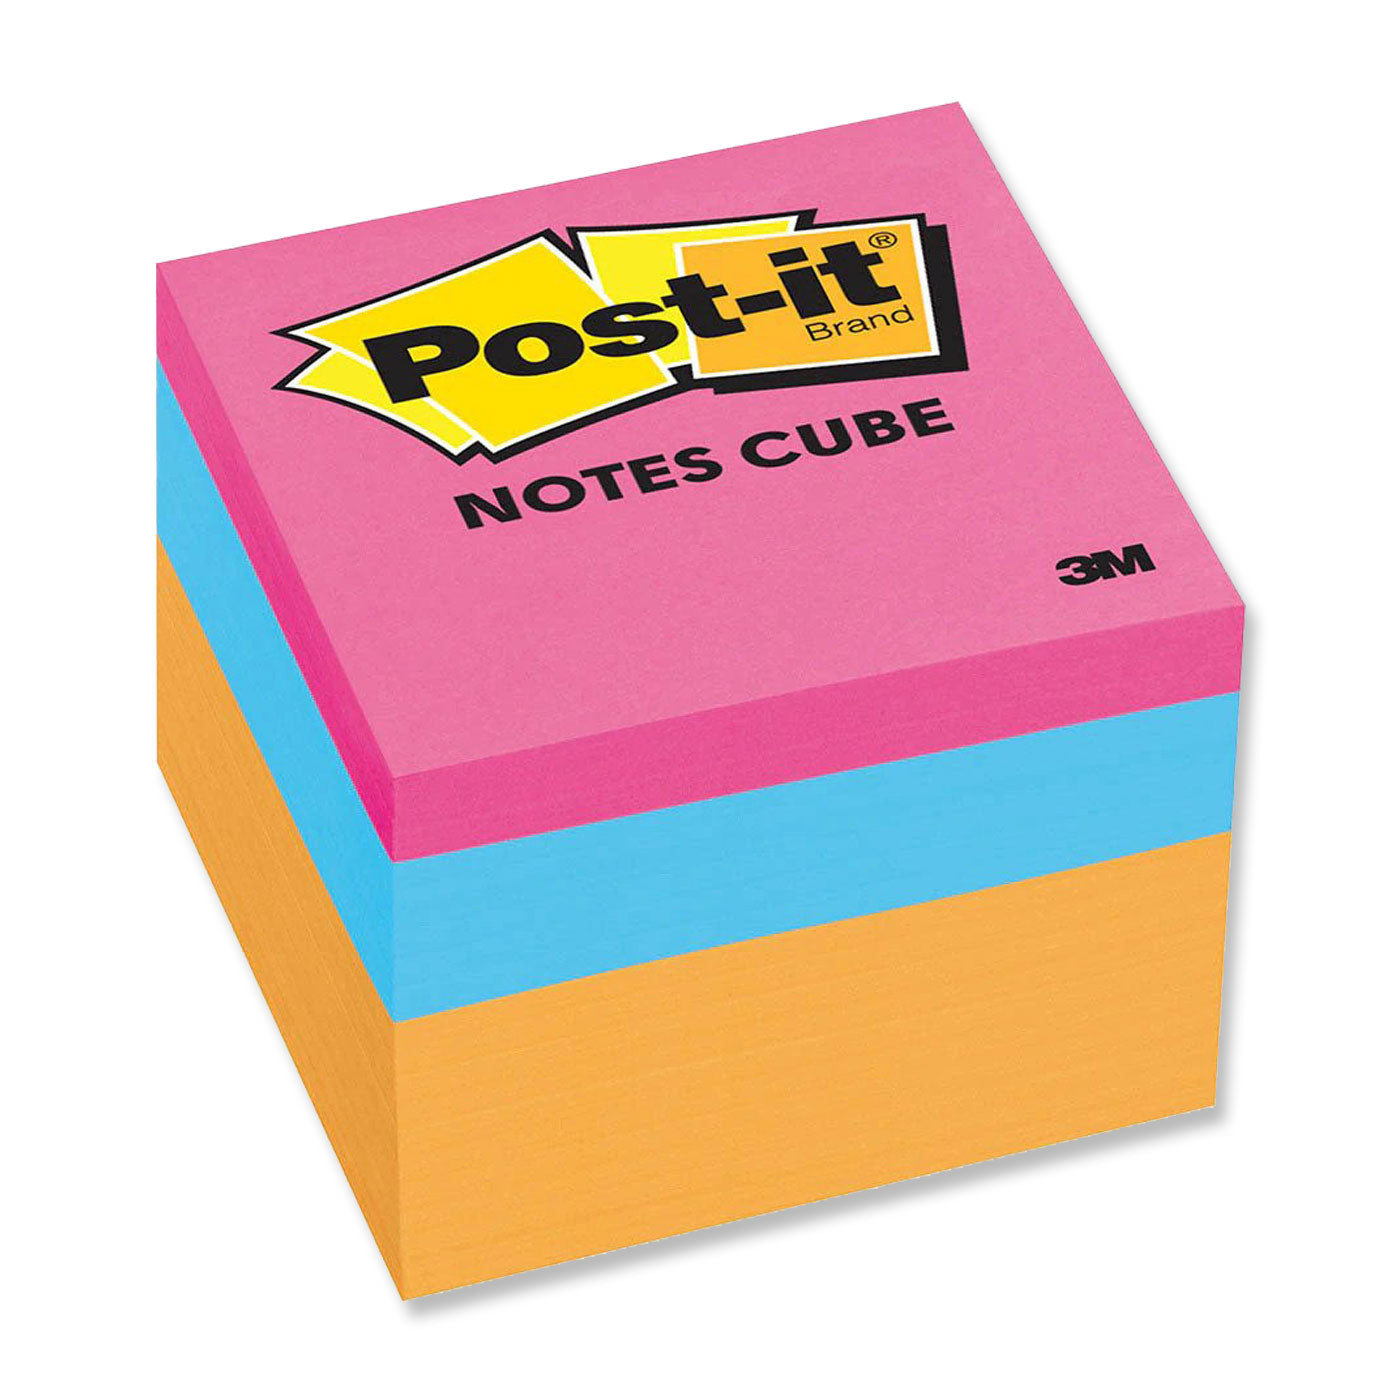 Post-it Sticky Notes Mini Cube Orange Wave 47.6 x 47.6 mm 400 Sheets